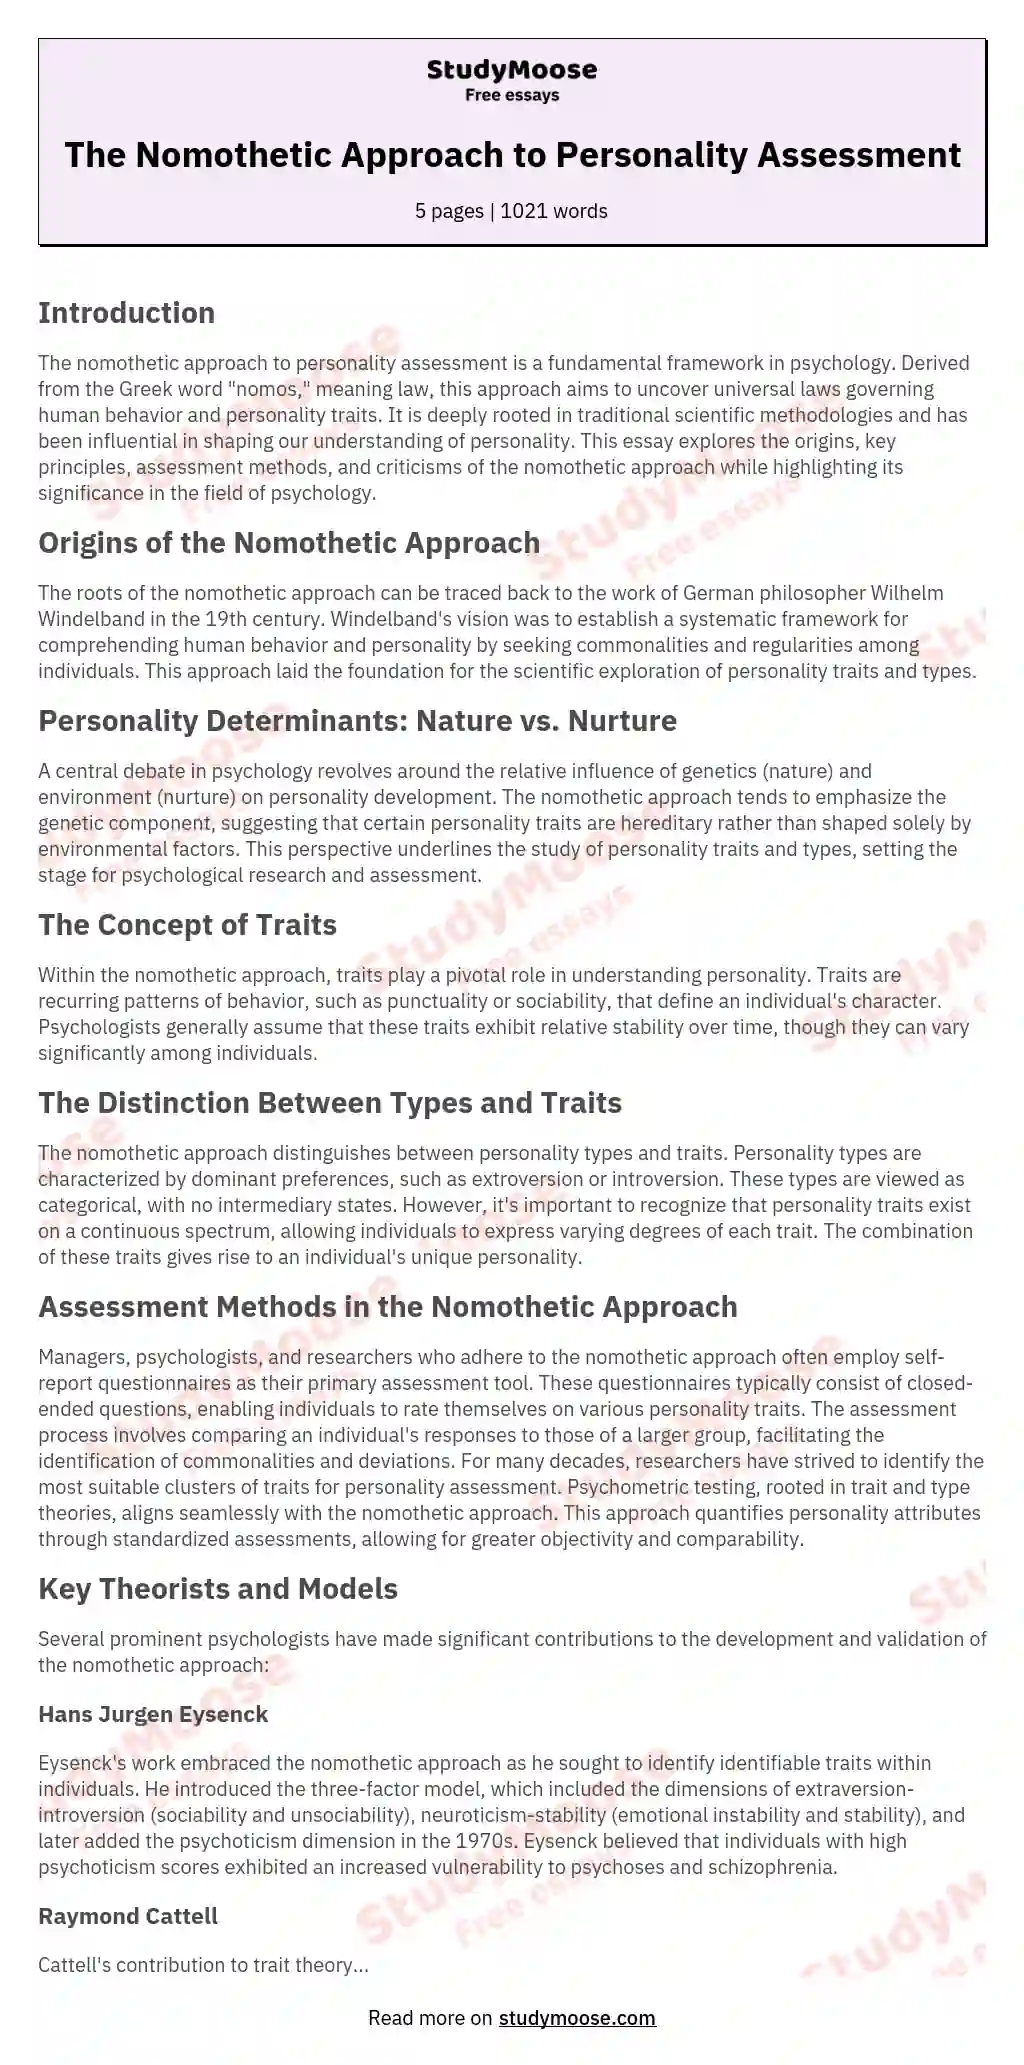 The Nomothetic Approach to Personality Assessment essay